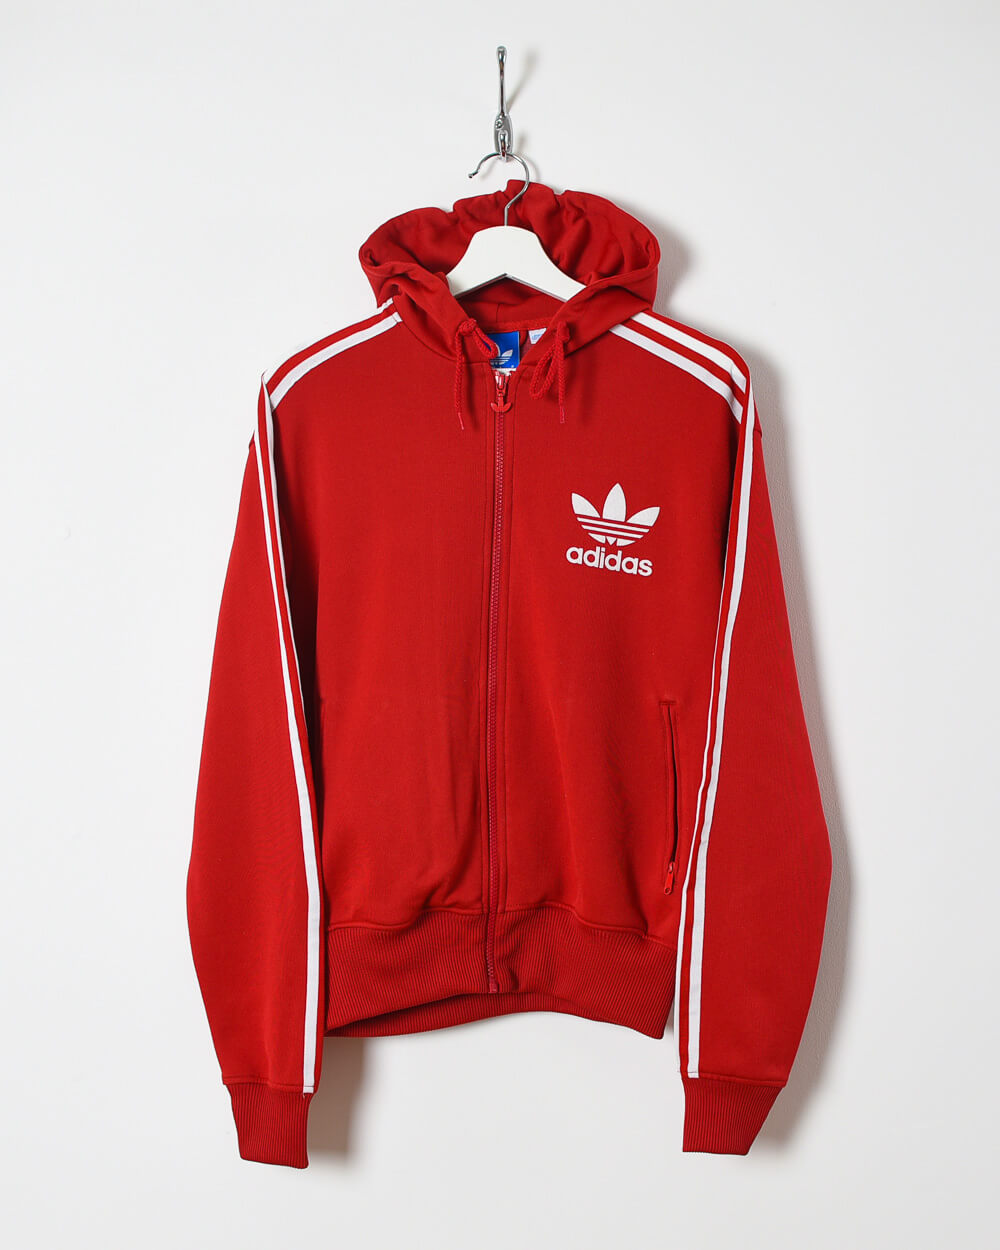 Adidas Tracksuit Top - Small - Domno Vintage 90s, 80s, 00s Retro and Vintage Clothing 